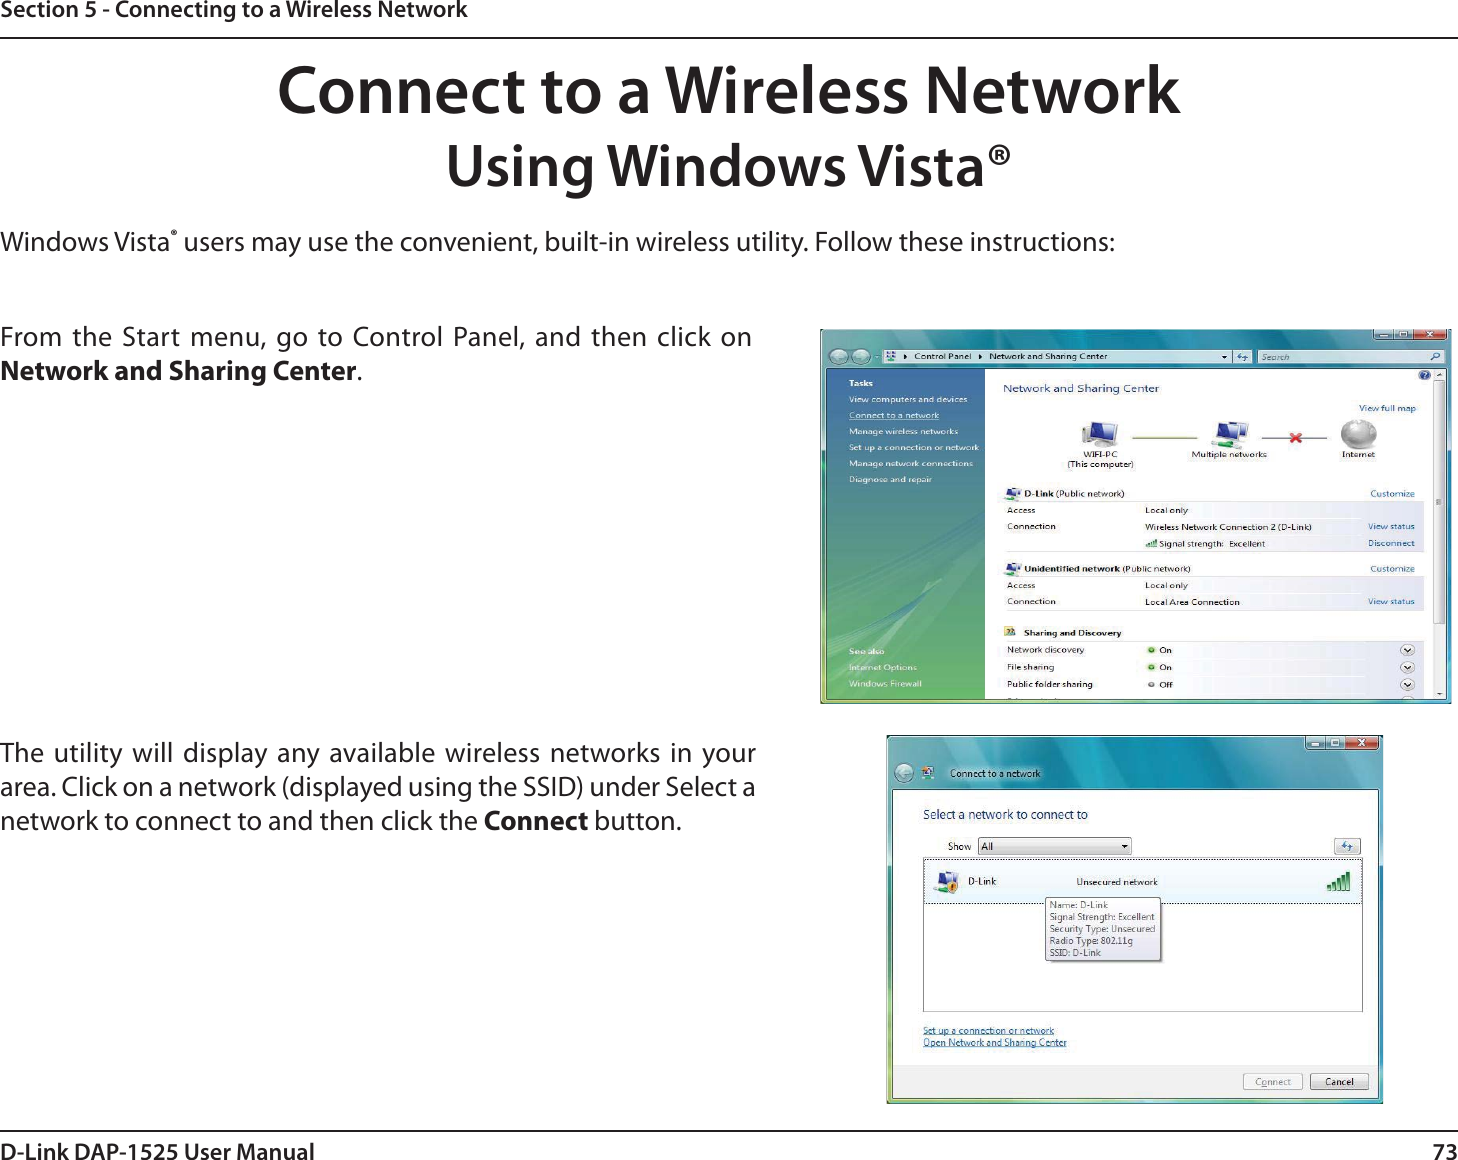 73D-Link DAP-1525 User ManualSection 5 - Connecting to a Wireless NetworkConnect to a Wireless NetworkUsing Windows Vista®Windows Vista® users may use the convenient, built-in wireless utility. Follow these instructions: From the Start menu, go to Control Panel, and then click on Network and Sharing Center. The utility will display any available wireless networks in your area. Click on a network (displayed using the SSID) under Select a network to connect to and then click the Connect button.